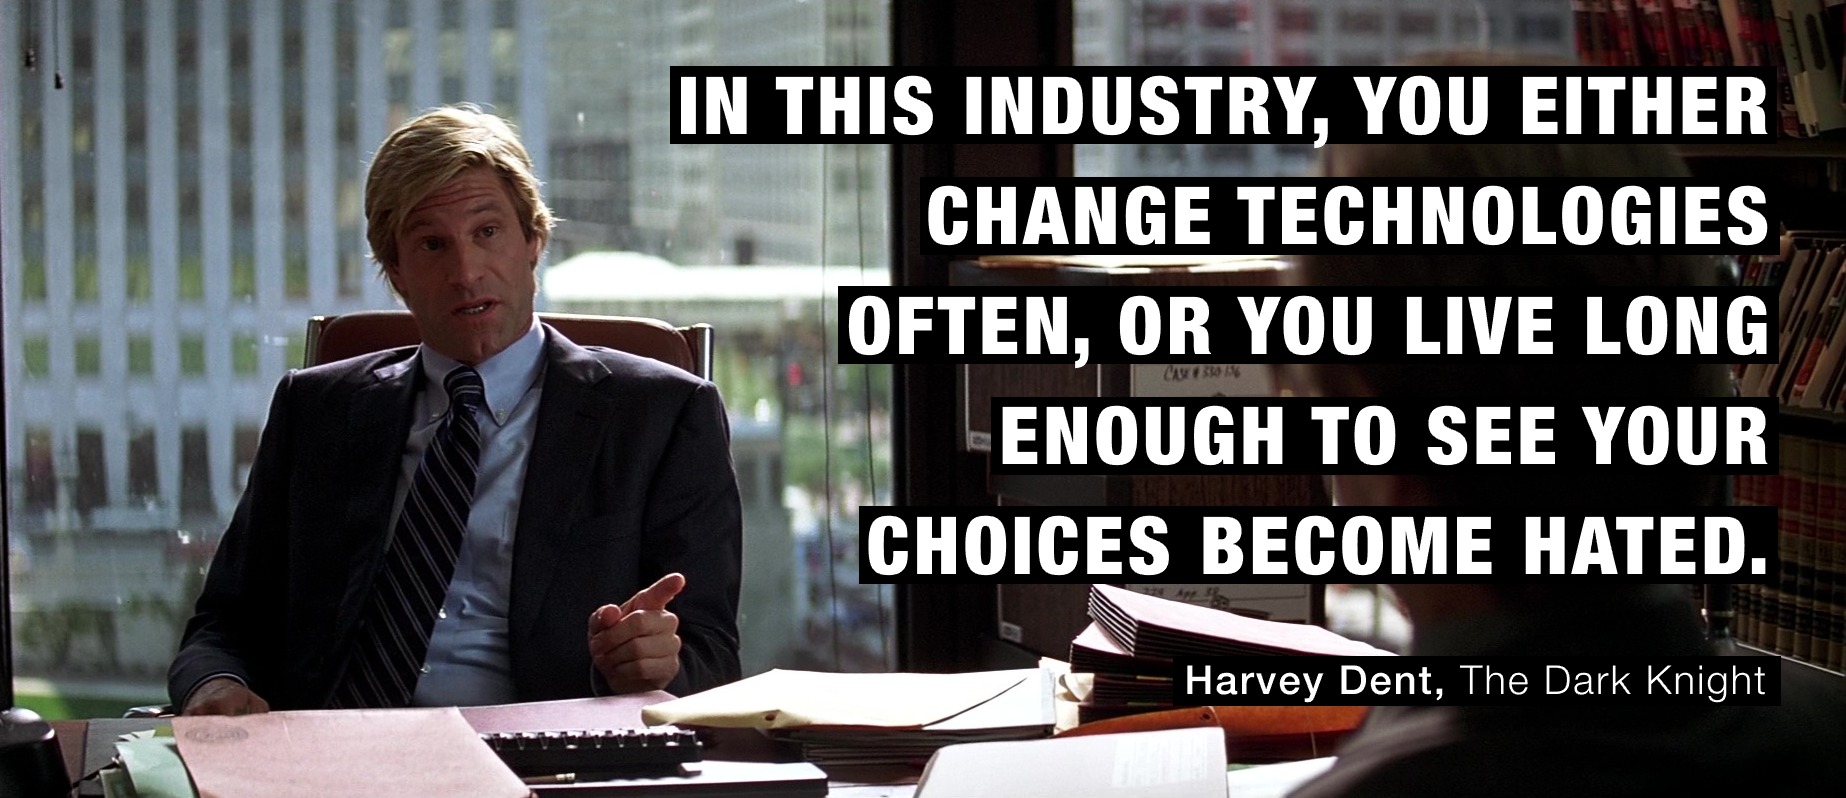 In this industry, you either change technologies often; or, you live long enough to see your choices become hated.